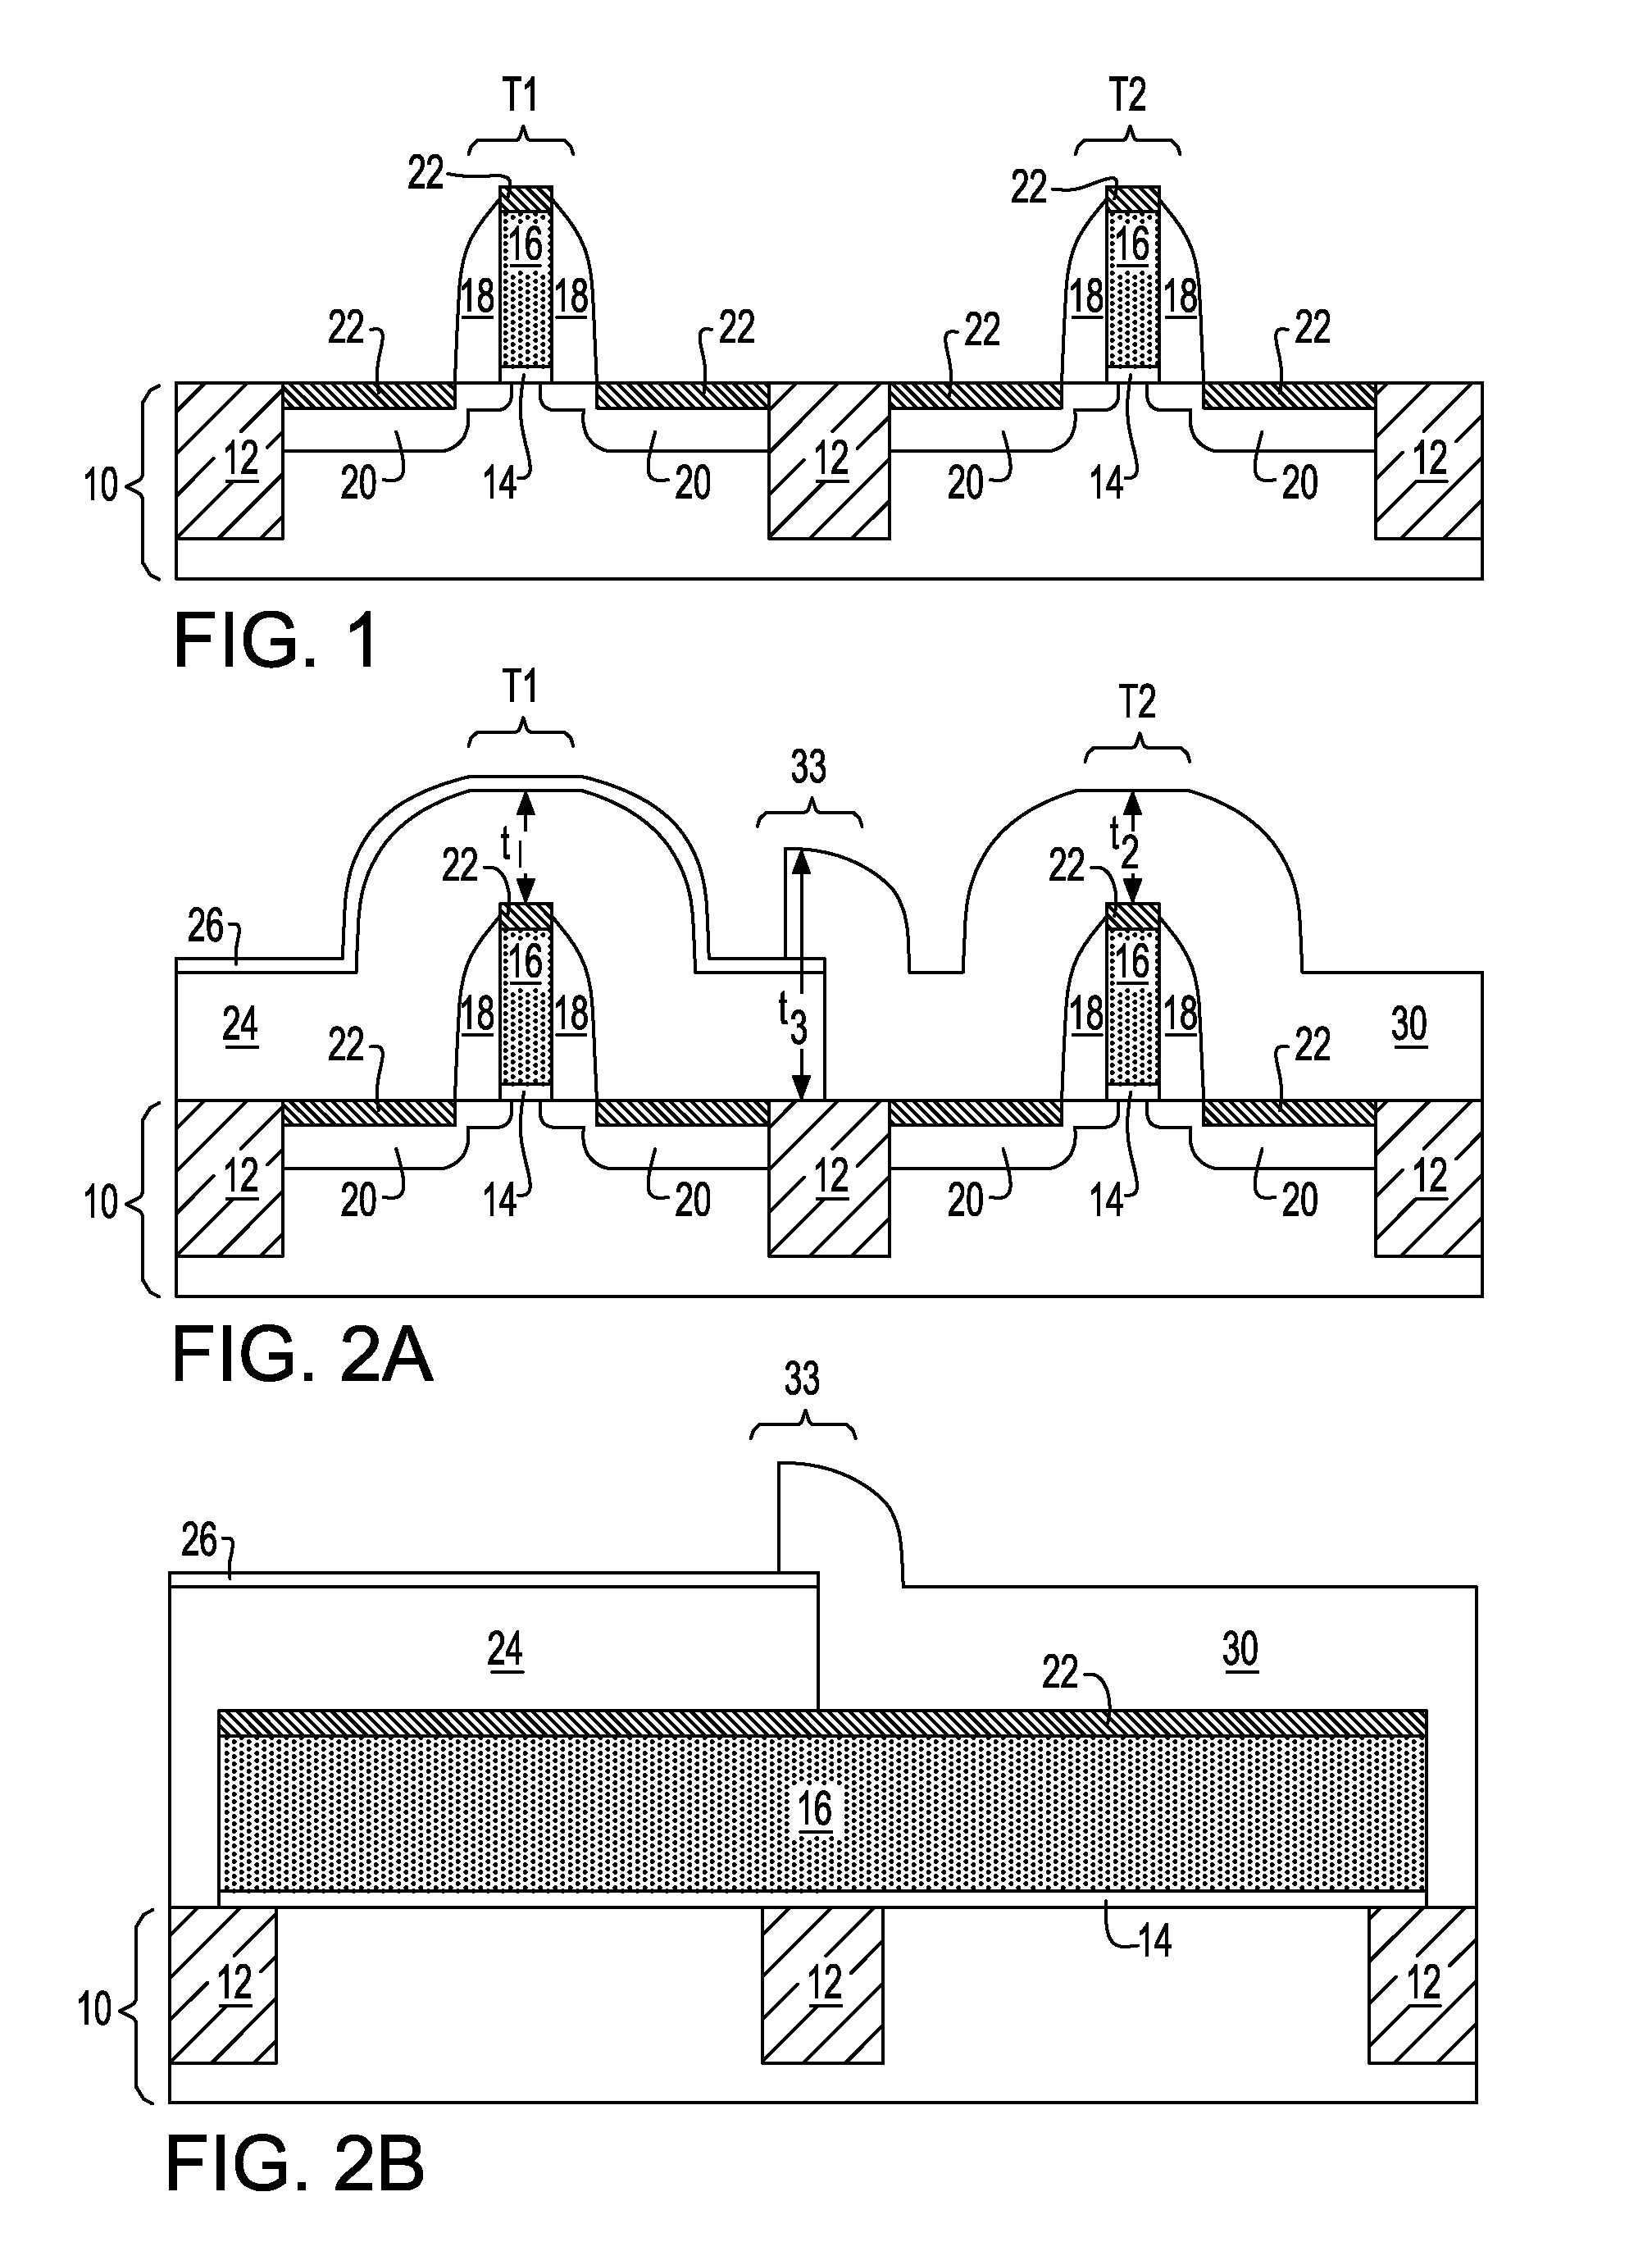 CMOS structures and methods for improving yield